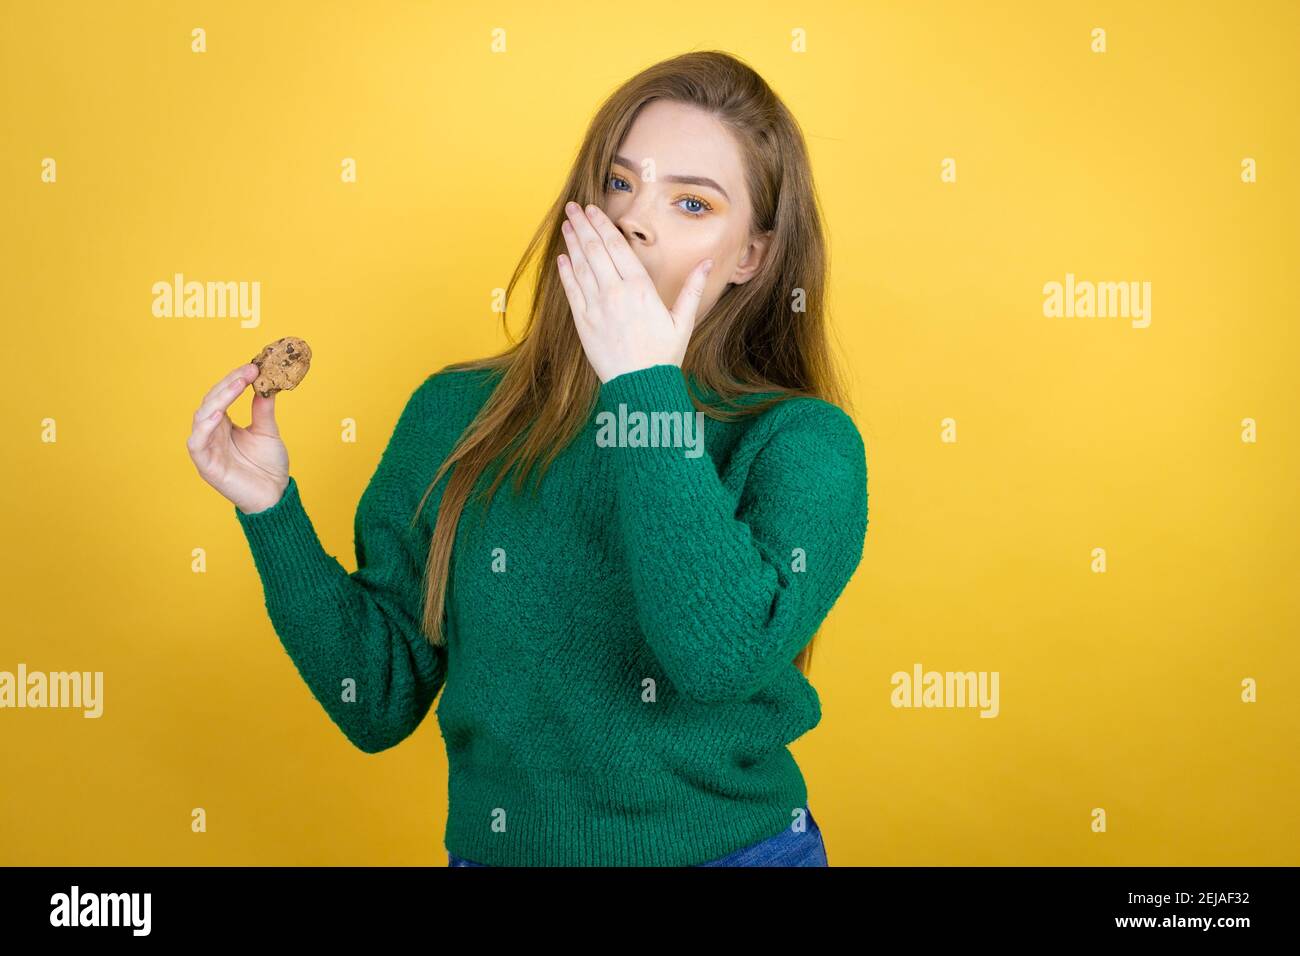 Young Beautiful Woman Eating Chocolate Cookie Over Yellow Background Bored Yawning Tired 9715